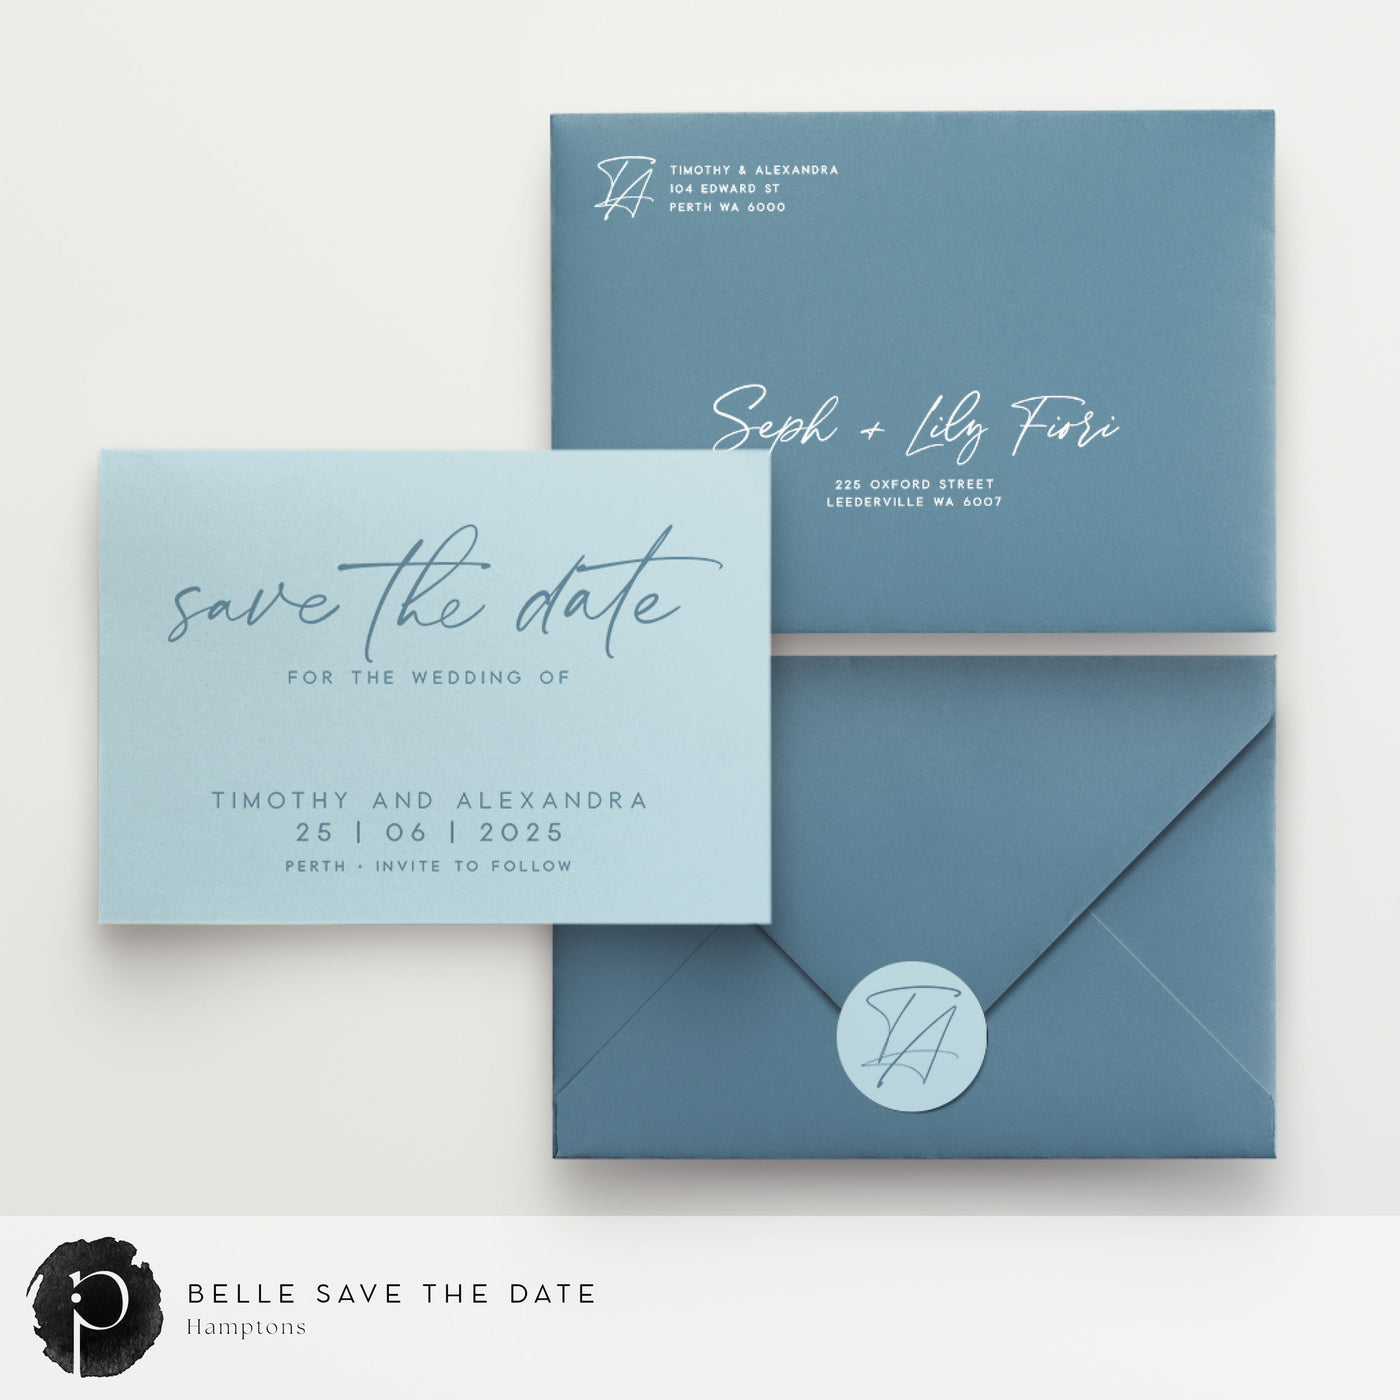 Belle - Save The Date Cards